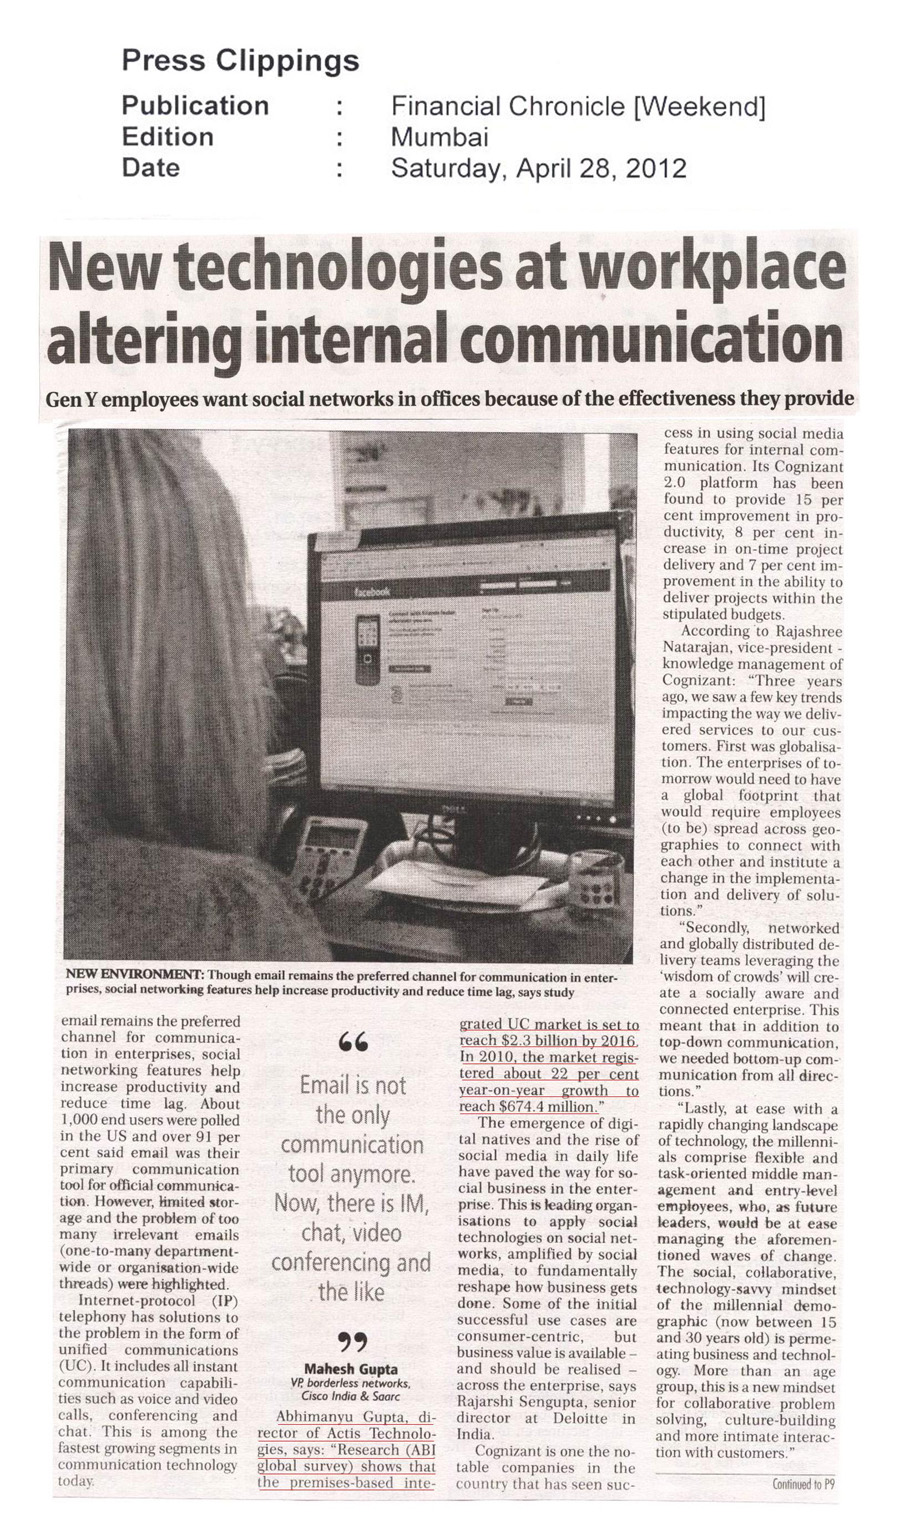 New technologies at workplace altering internal communication - Financial Chronicle (Print)